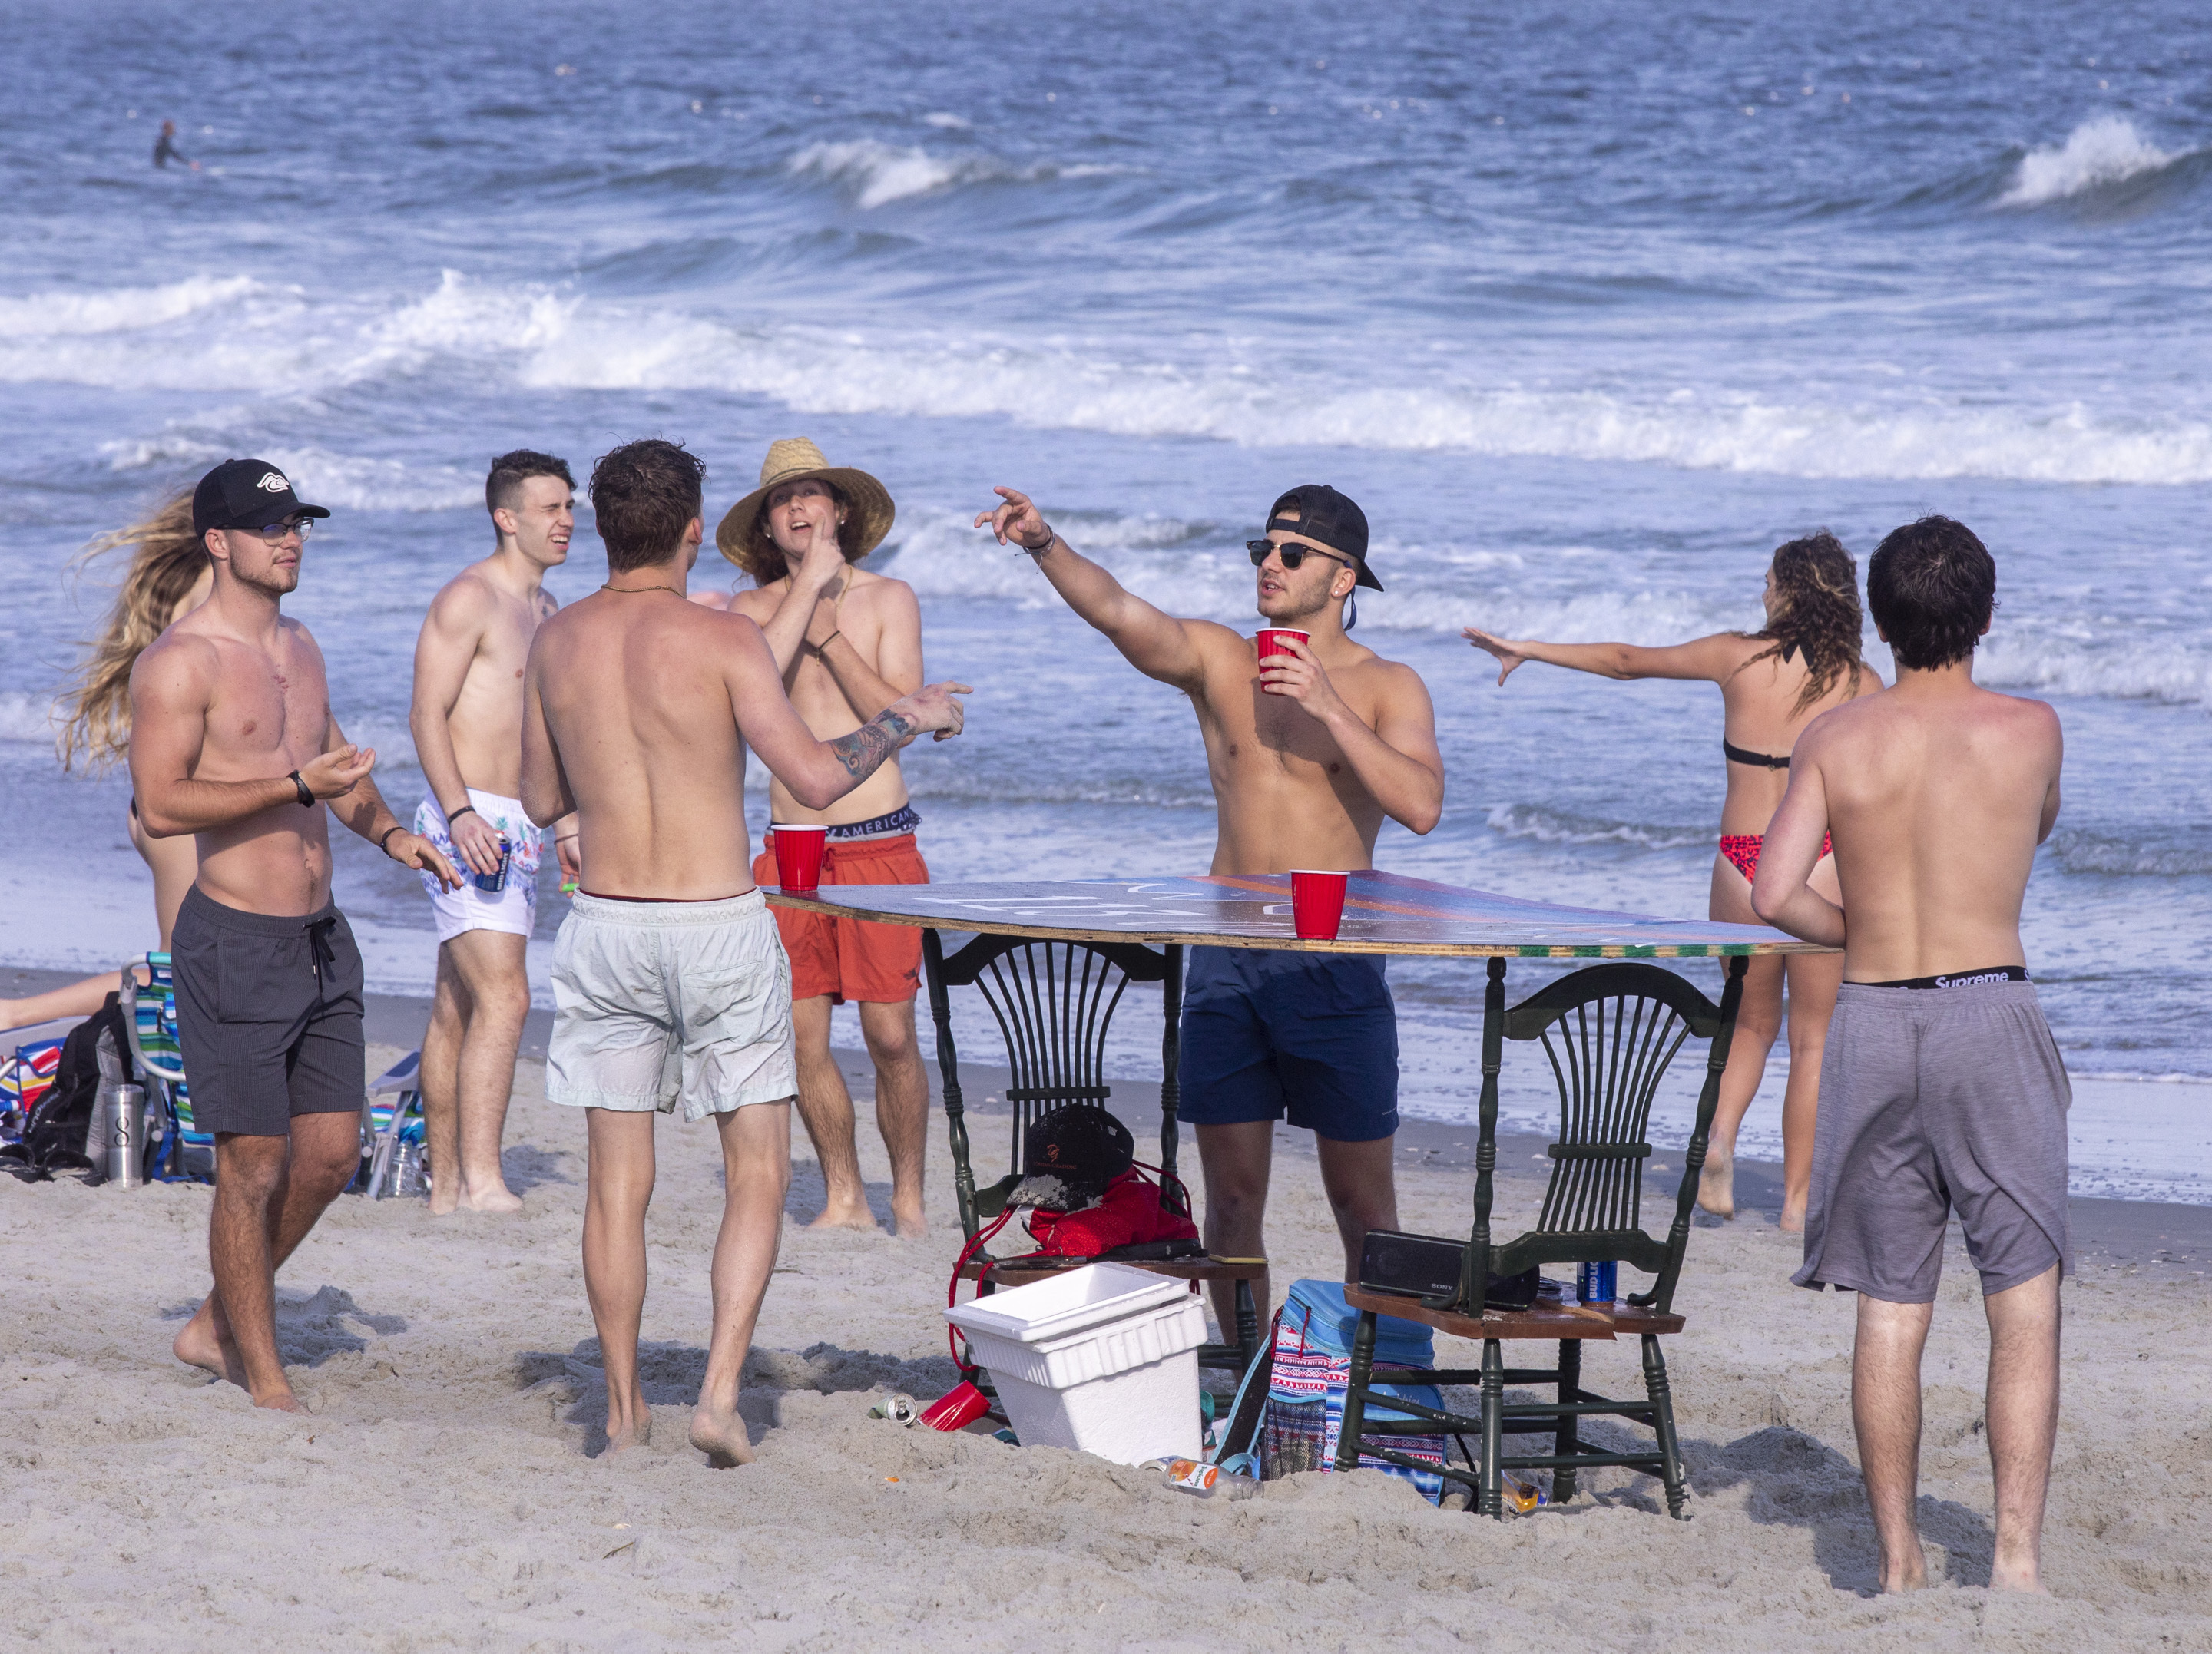 Despite warnings from government officials take caution and self distance because of coronavirus, many college students, some from Coastal Carolina University, hang out on the beach at 65th Avenue North in Myrtle Beach, S.C. on March 19, 2020.